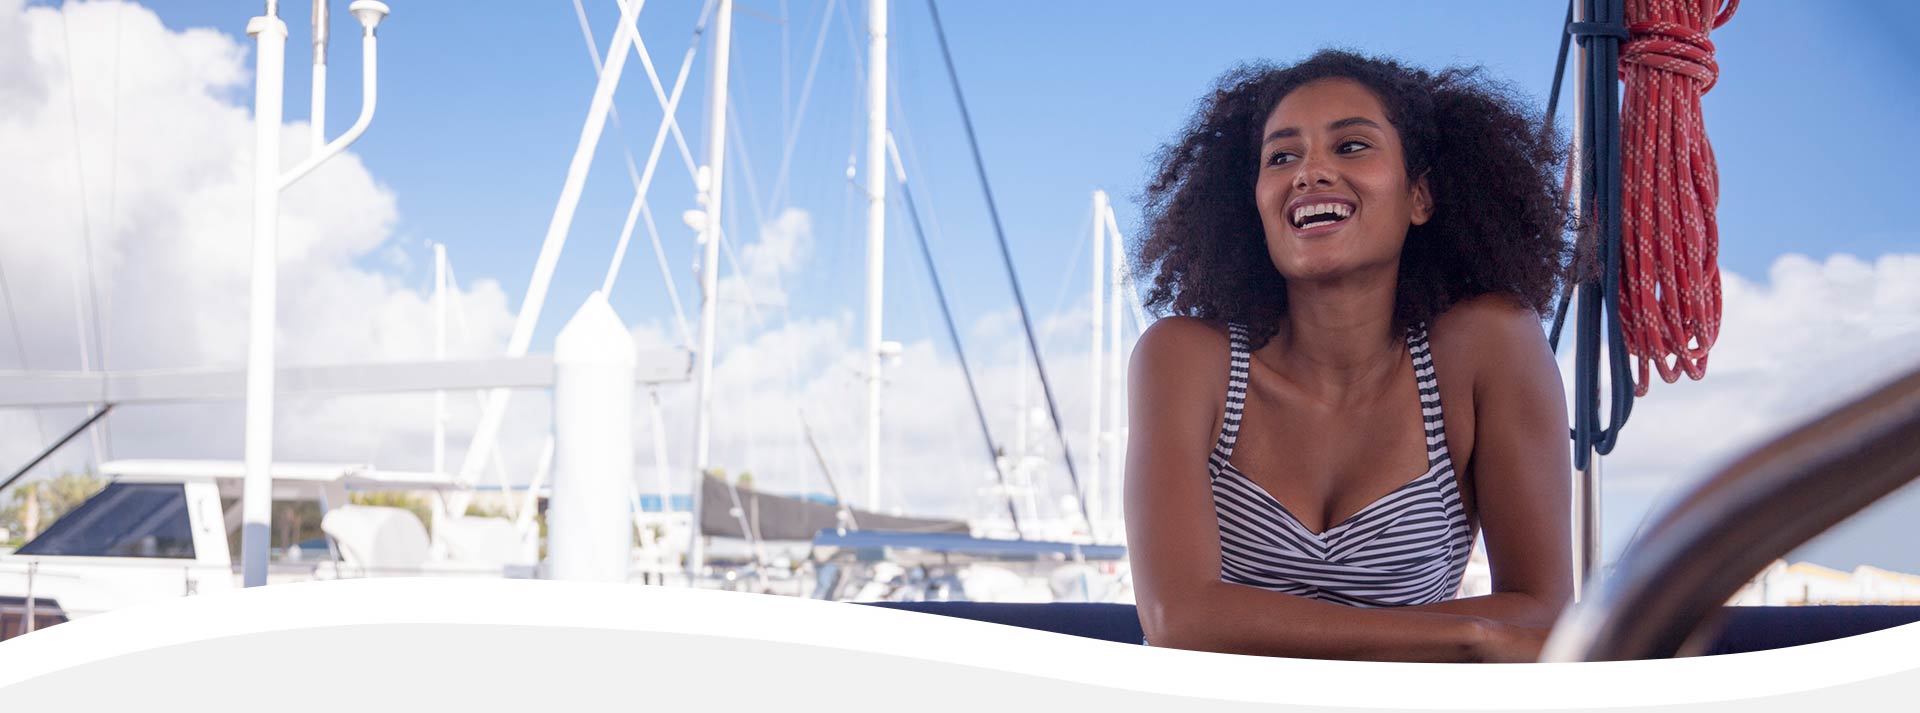 smiling woman on sailboat